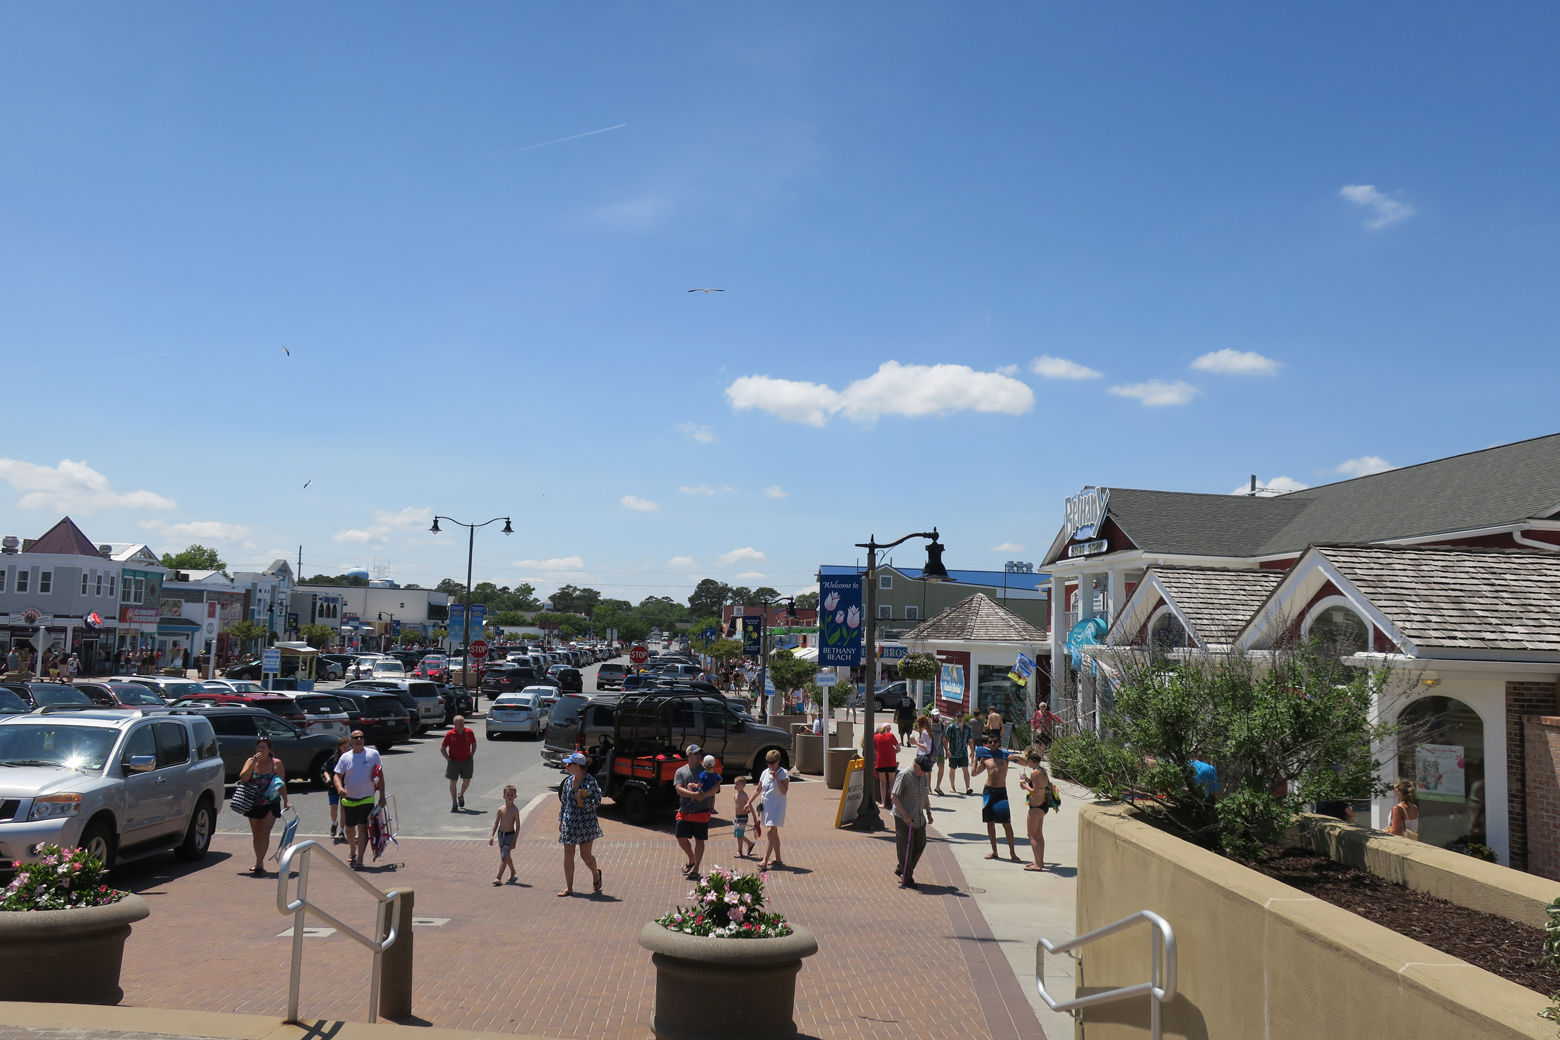 Bethany's main drag with cars parked is shown